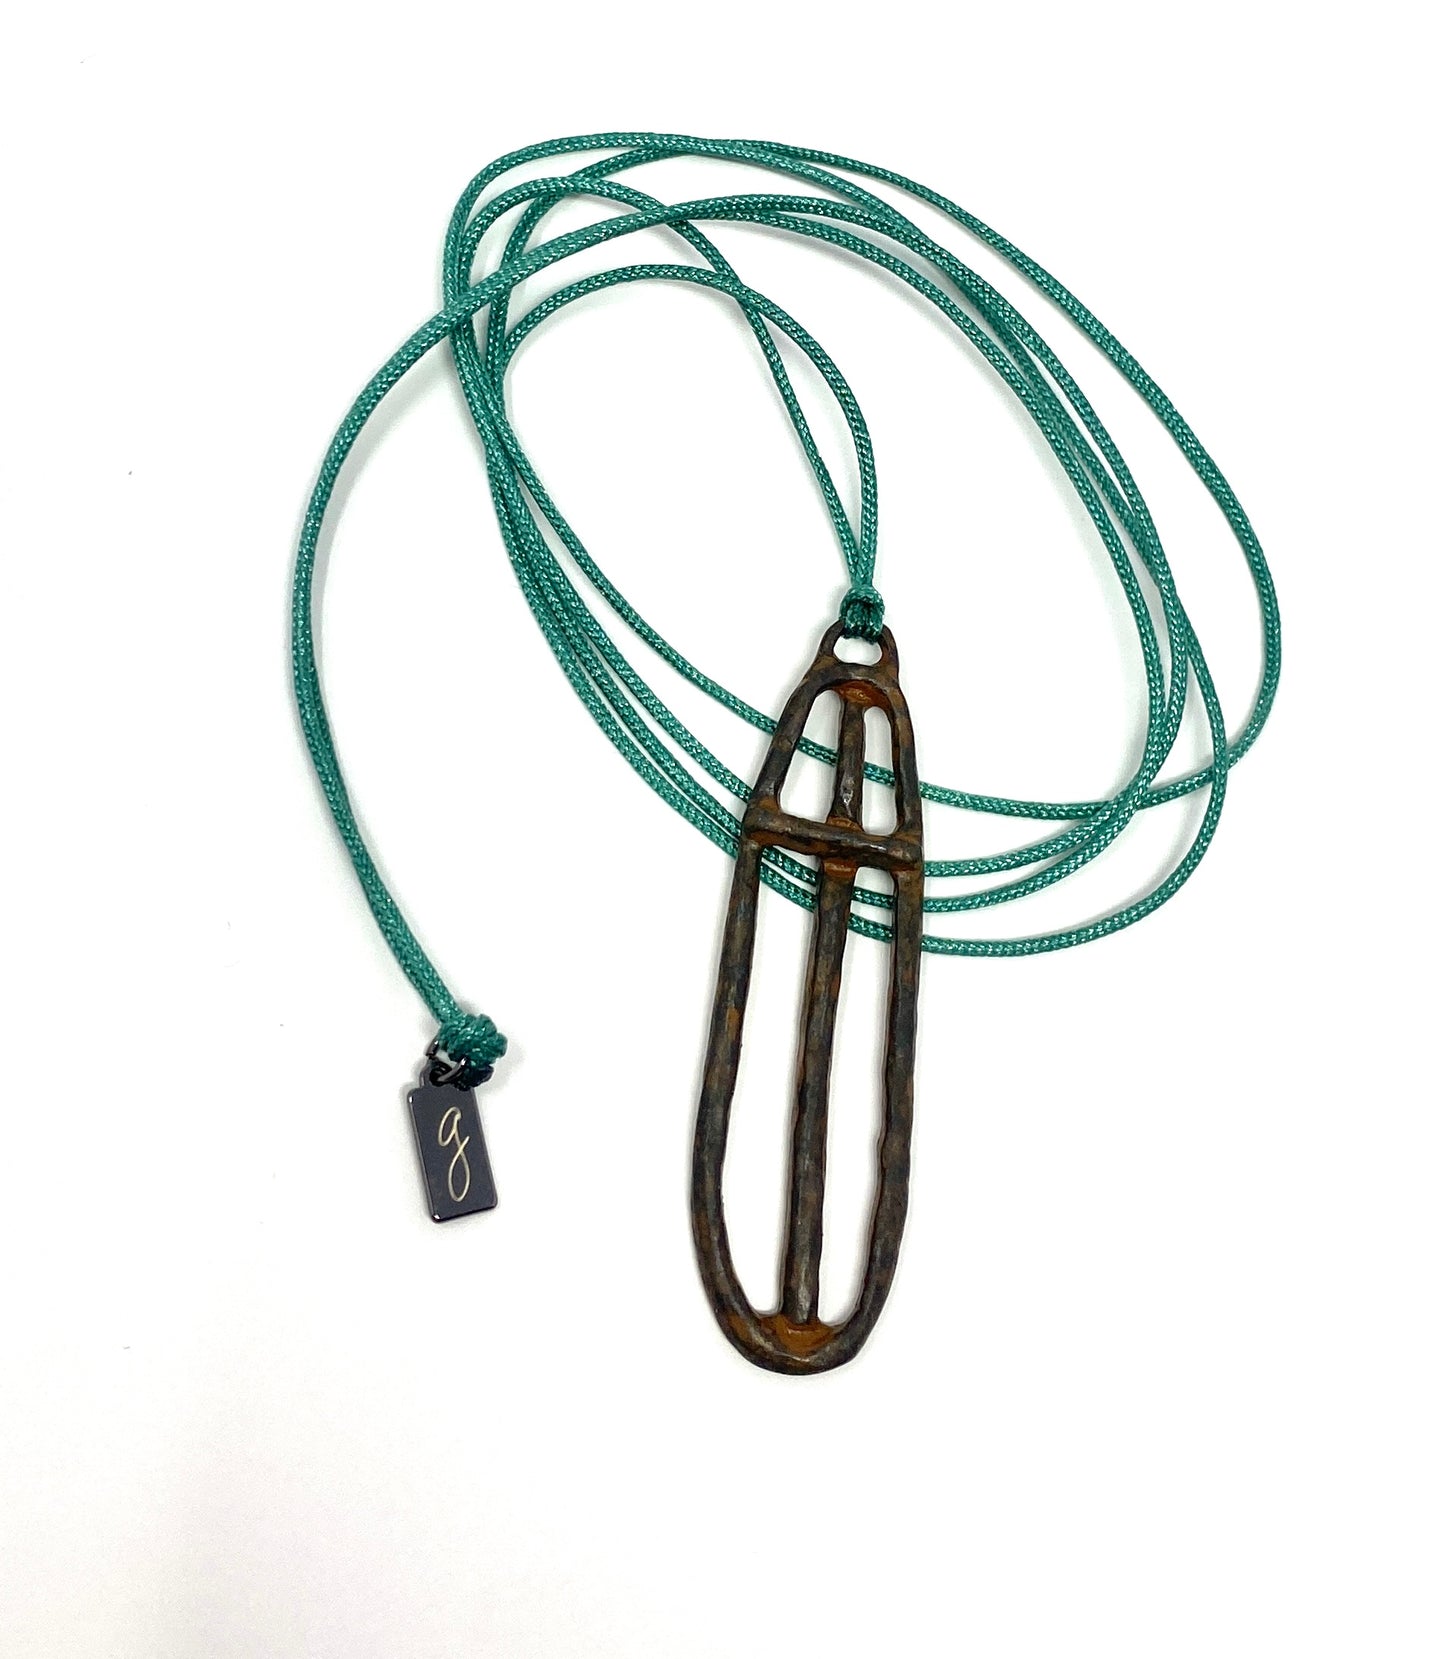 Dark Teal Nylon Cord Necklace With Rustic Cross Pendant